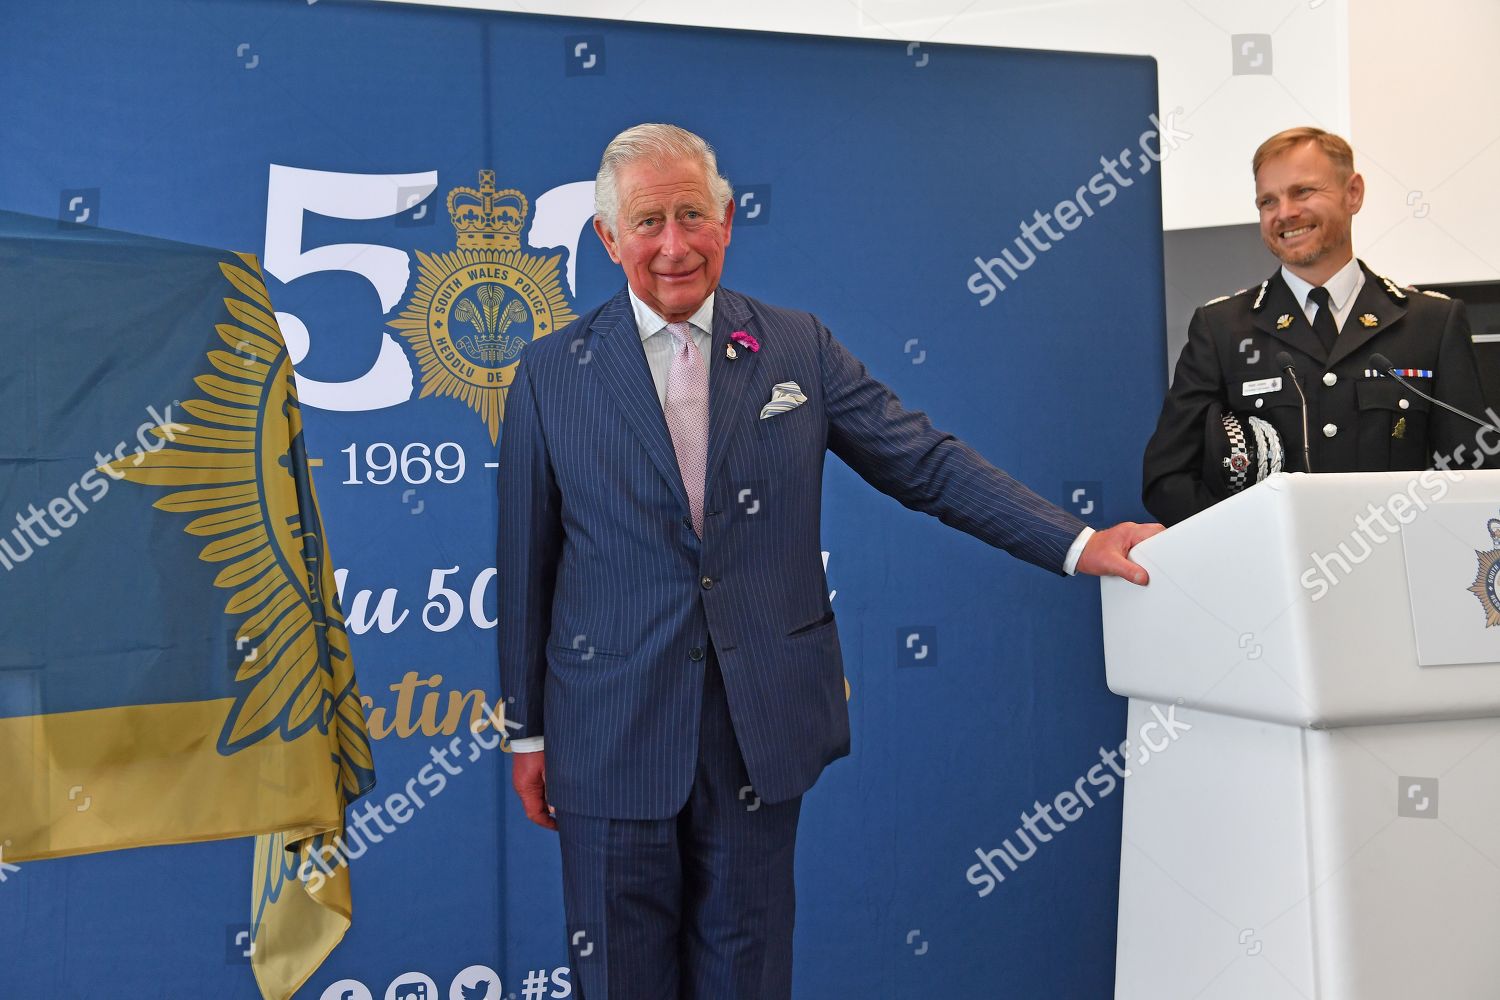 prince-charles-visit-to-wales-uk-shutterstock-editorial-10326139q.jpg